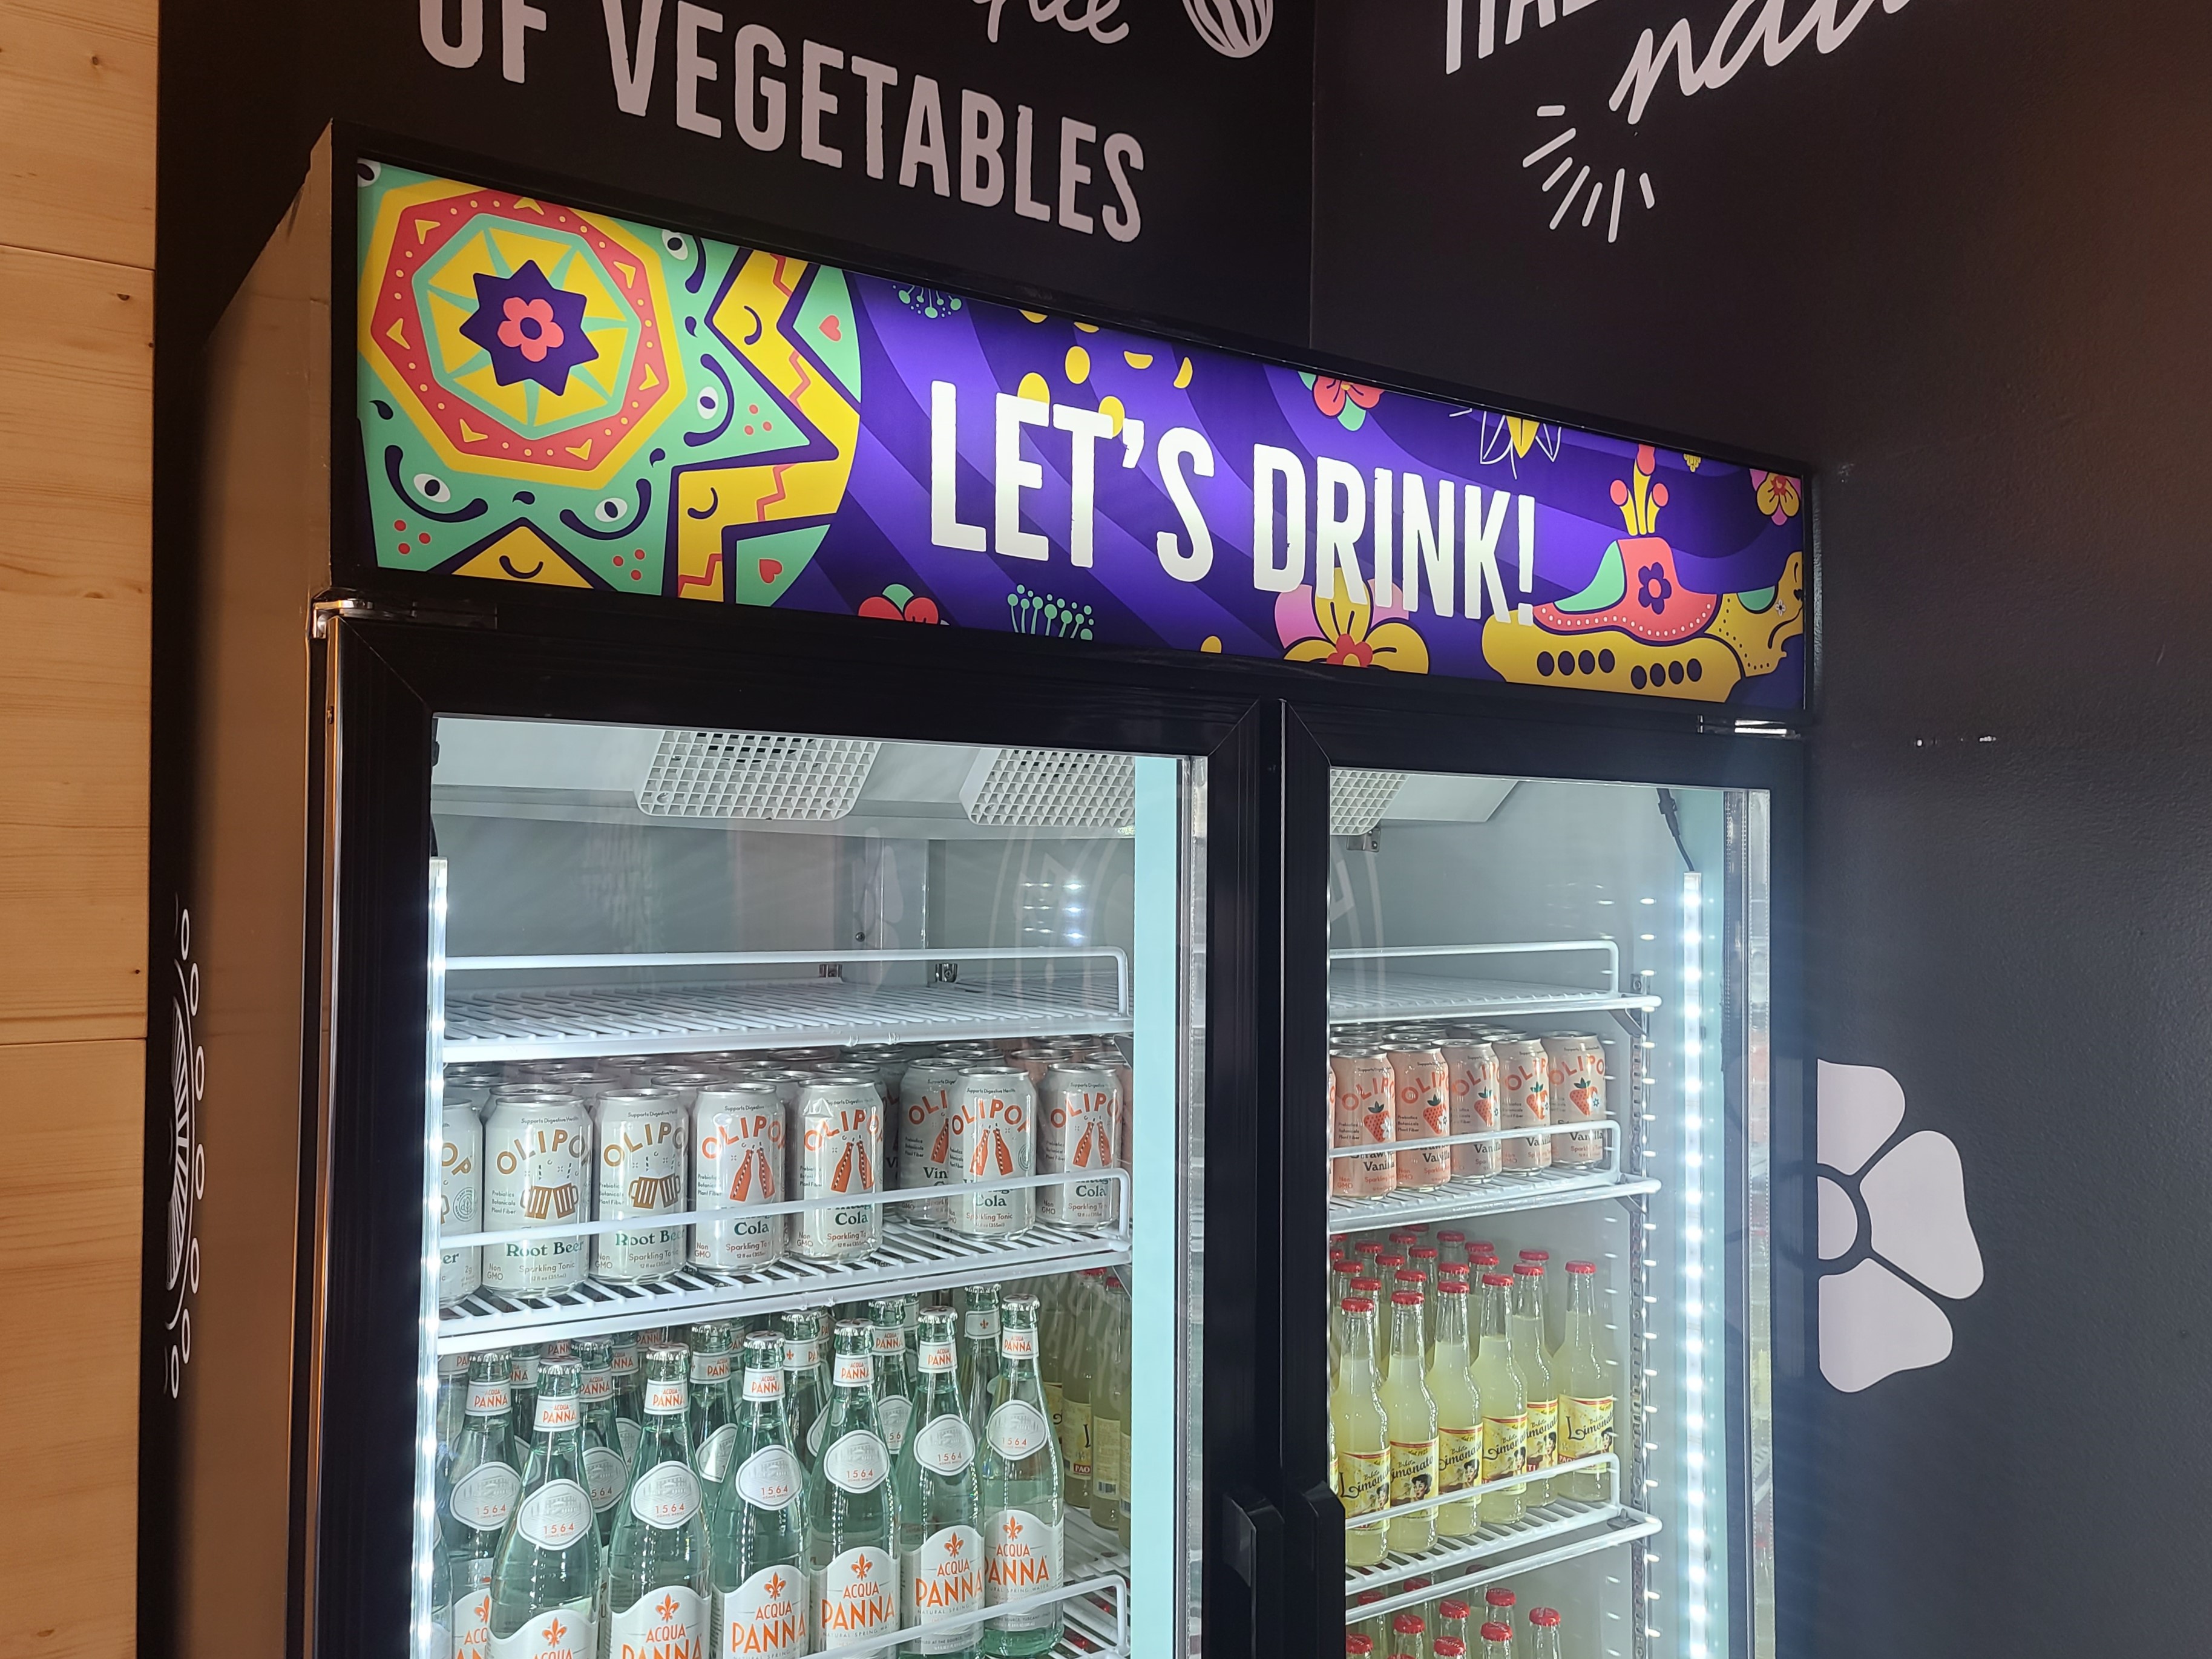 Lightbox inserts can work on refrigerators as well! These are great for pizzazz and advertising, like this merchandising sign for Flower Burger in Melrose.